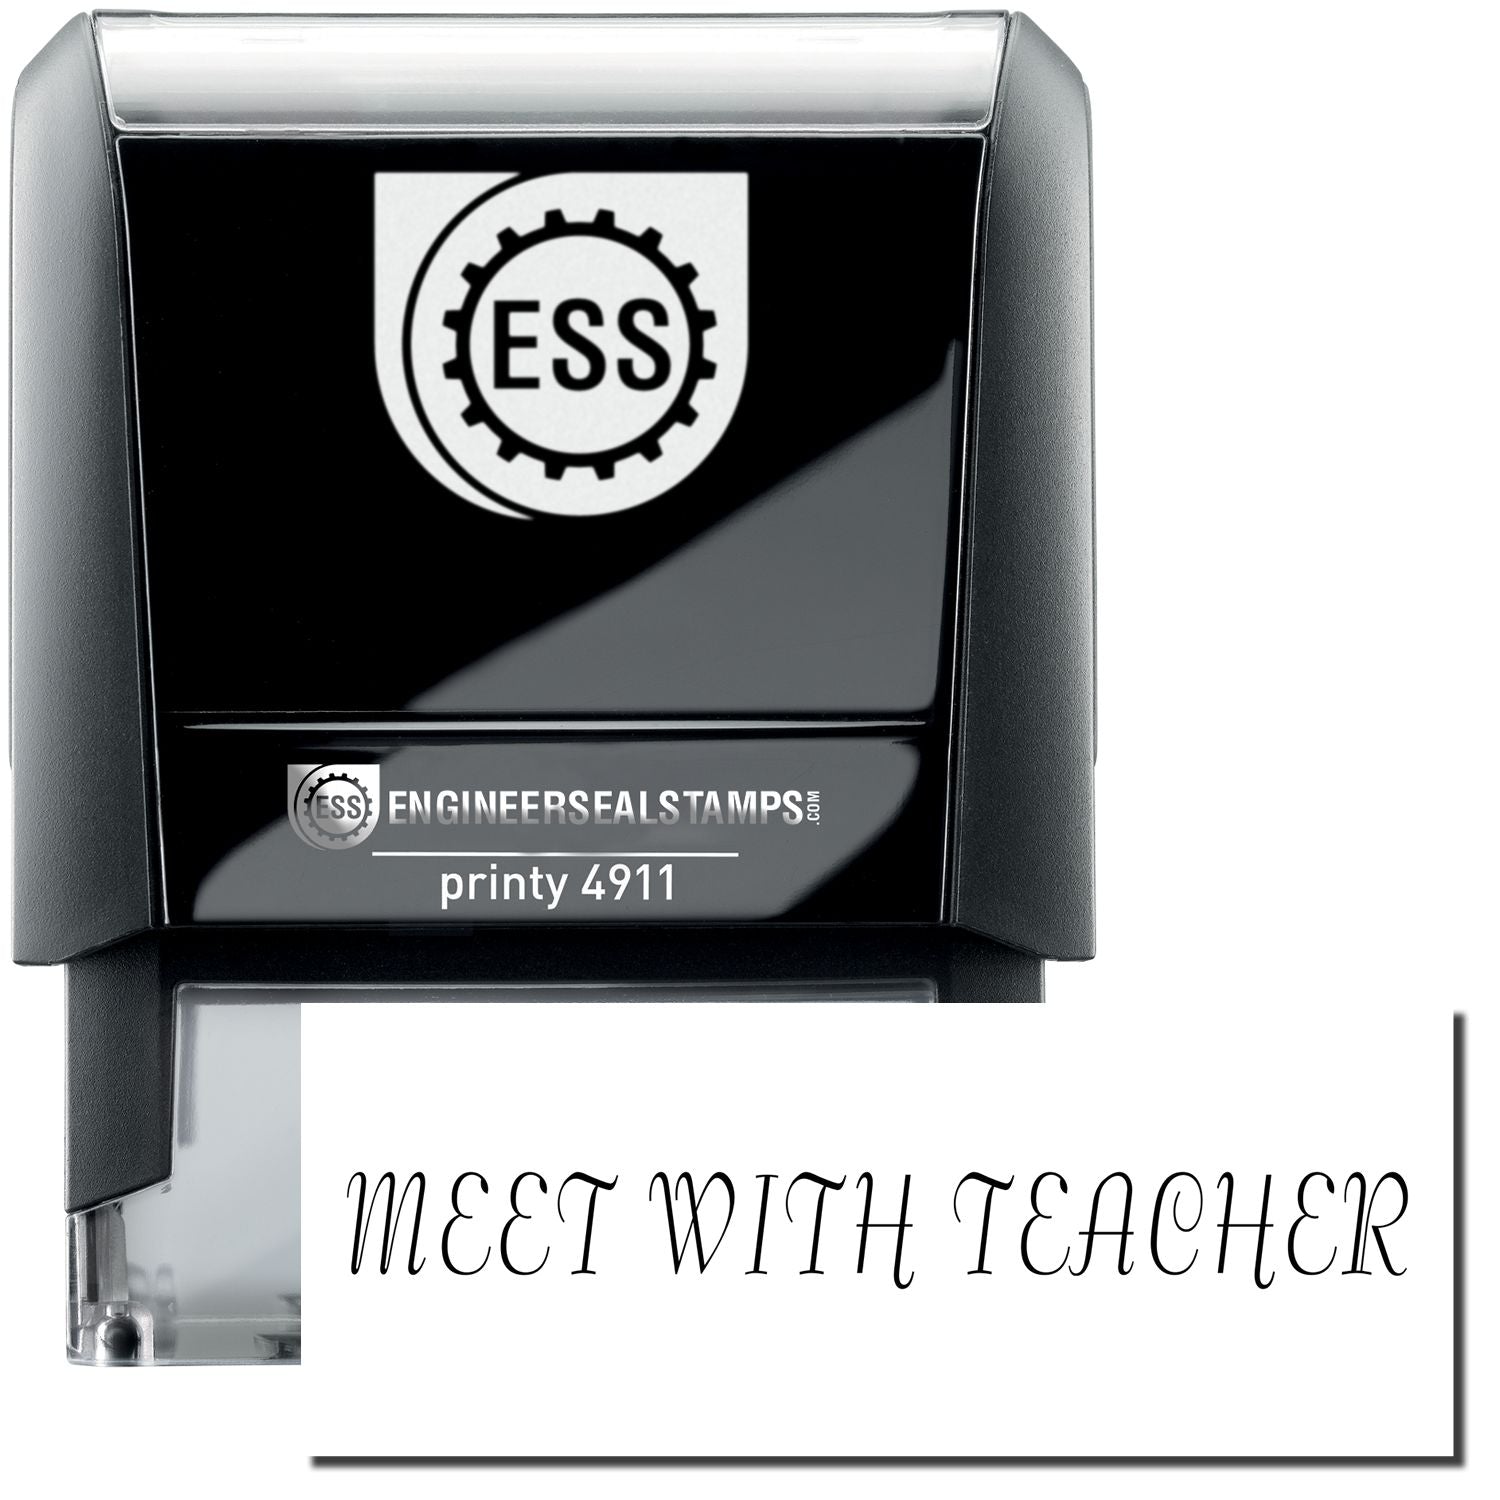 A self-inking stamp with a stamped image showing how the text "MEET WITH TEACHER" is displayed after stamping.